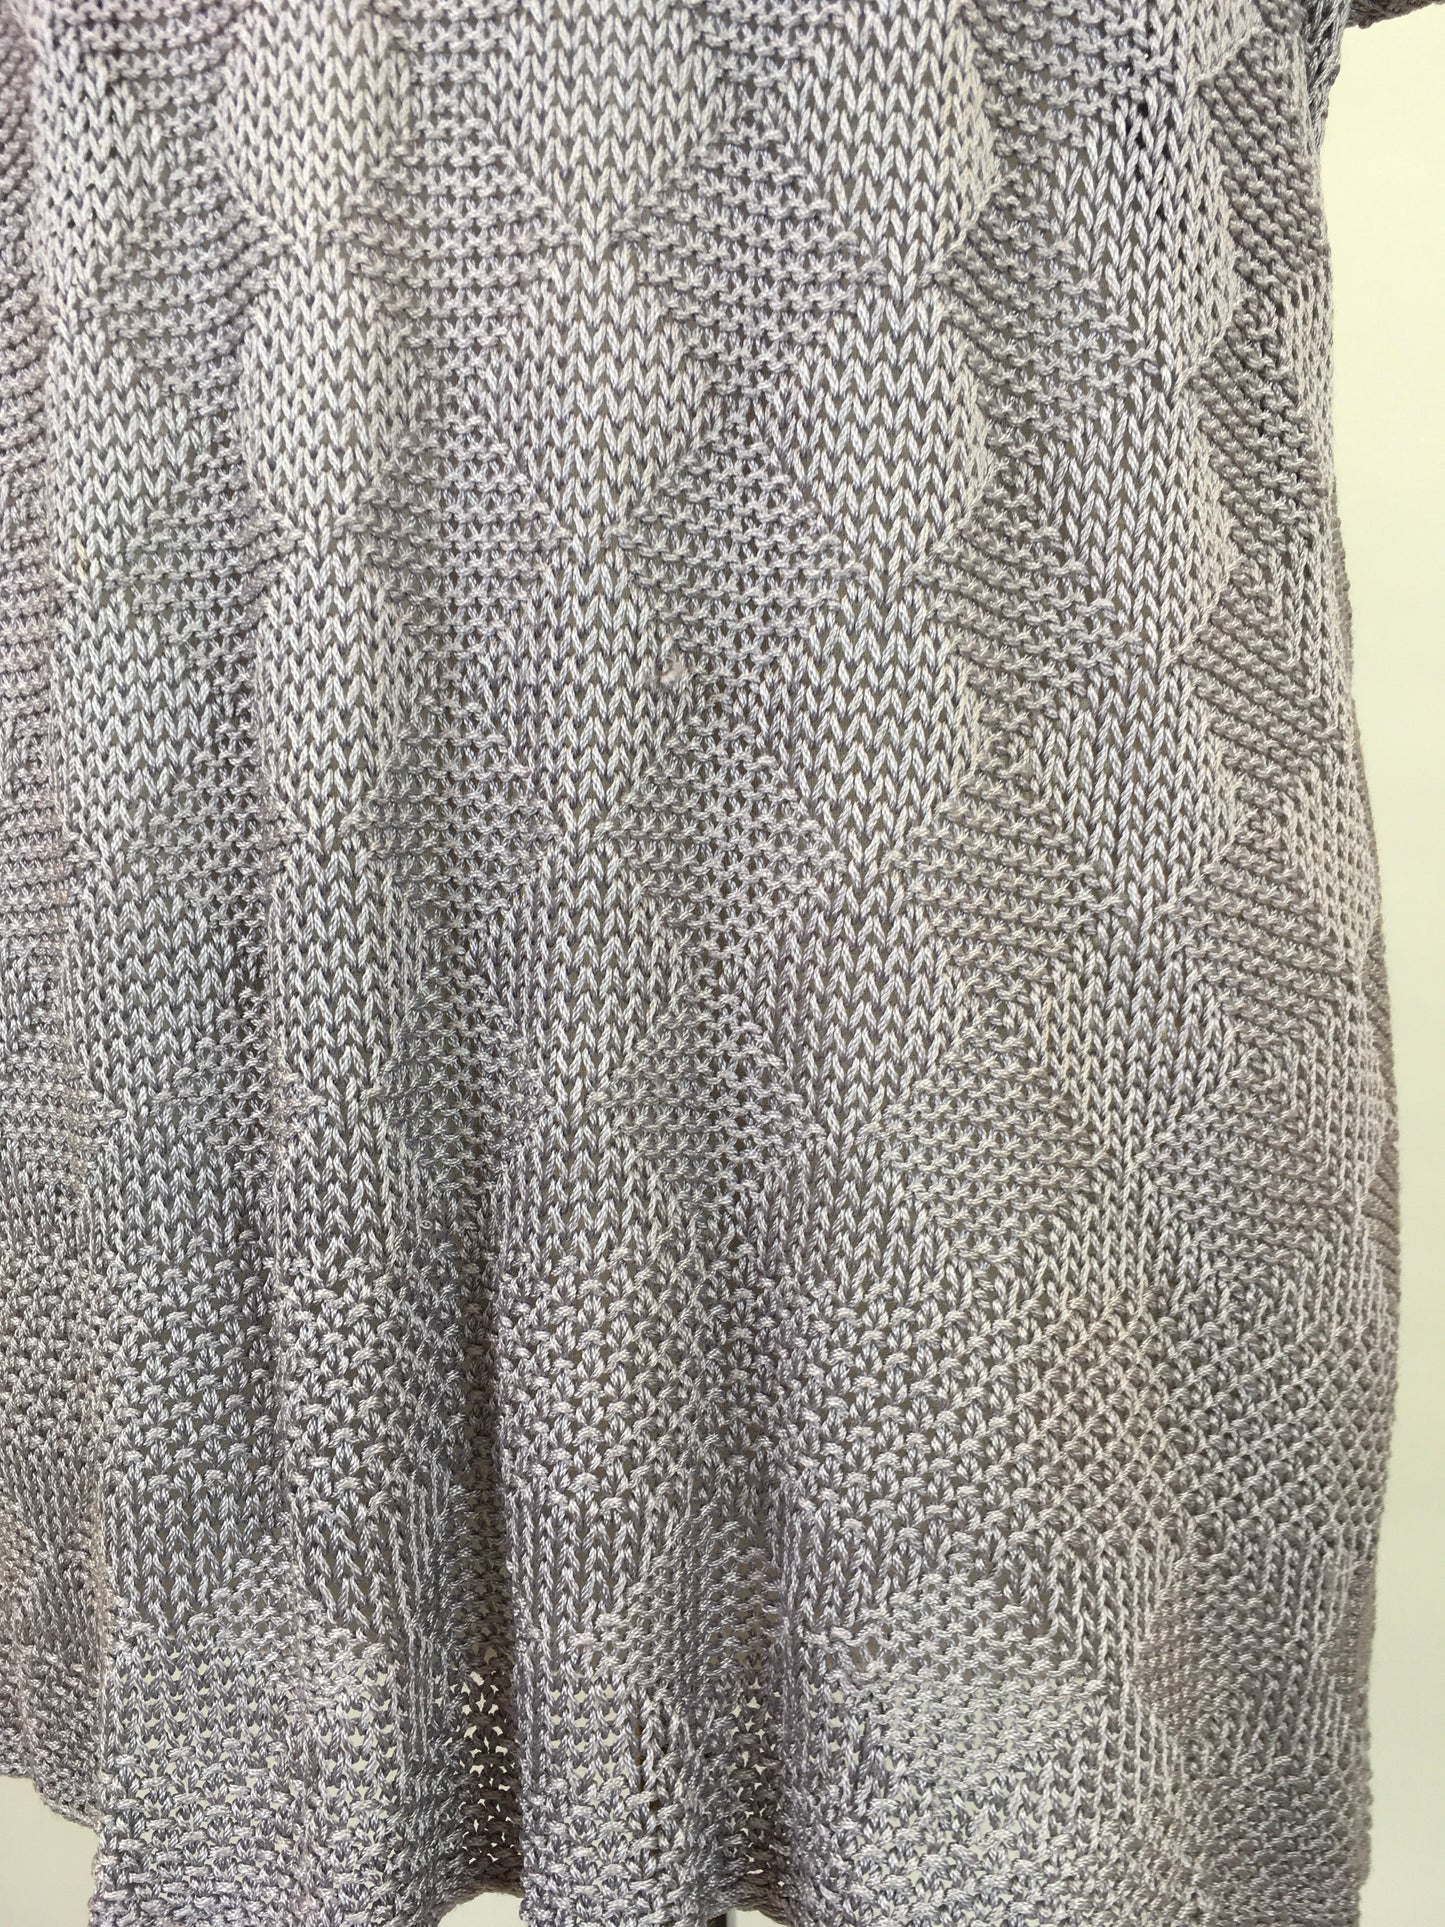 Original 1930s Knitted Tunic in Soft Lavender - Featuring Harlequin Pattern and Shapes Hemline